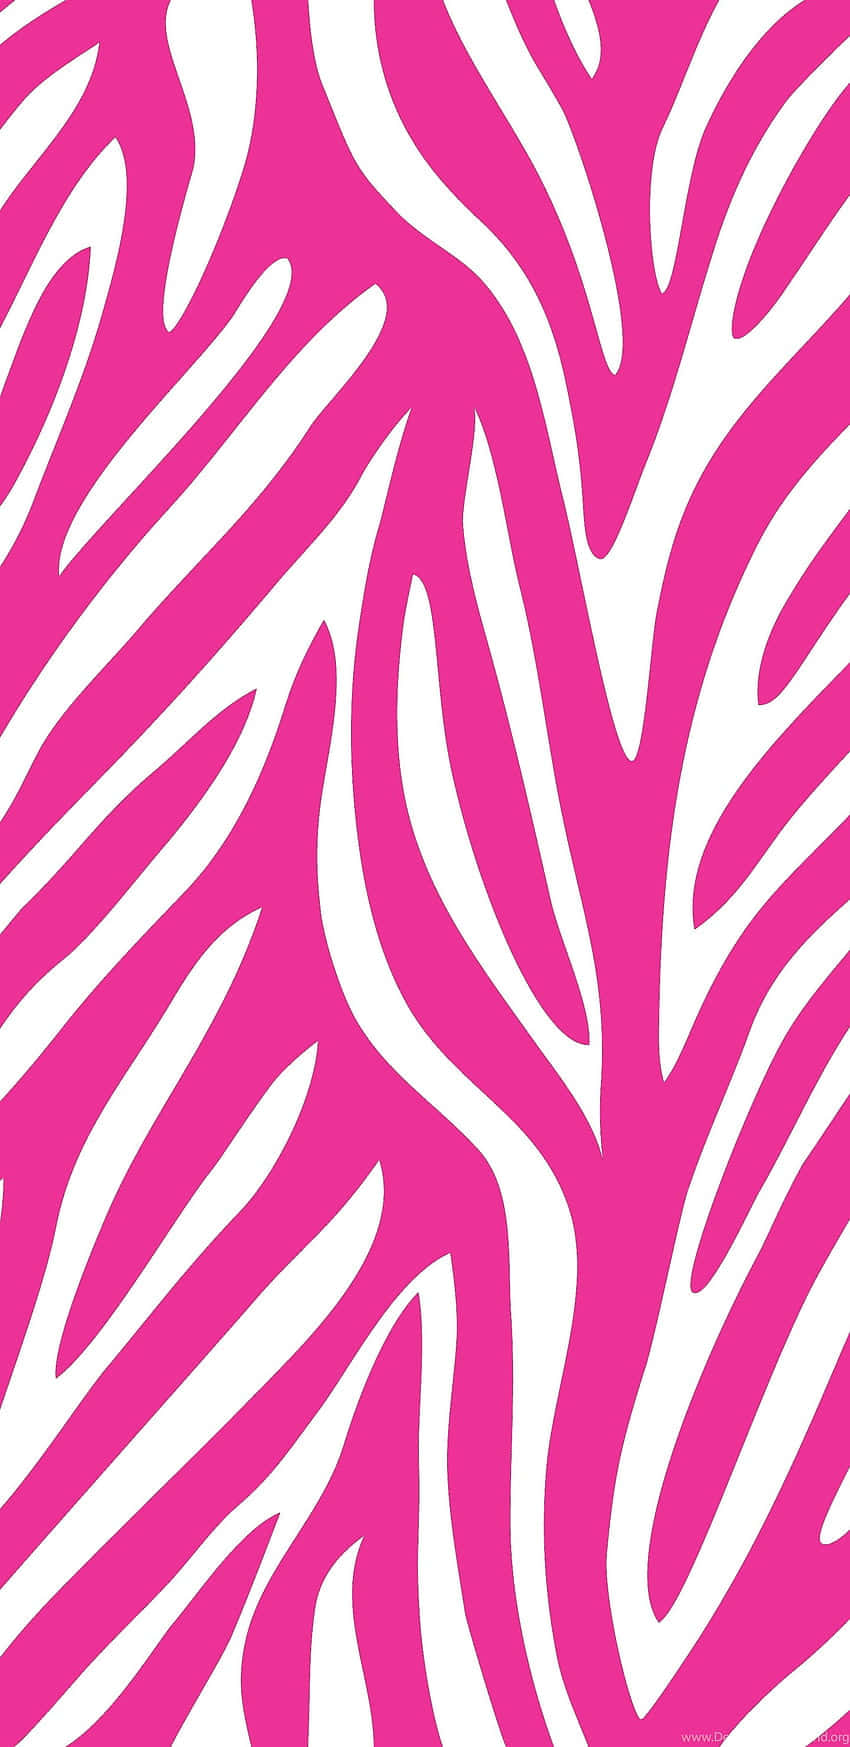 A Pink And White Zebra Print Fabric Wallpaper